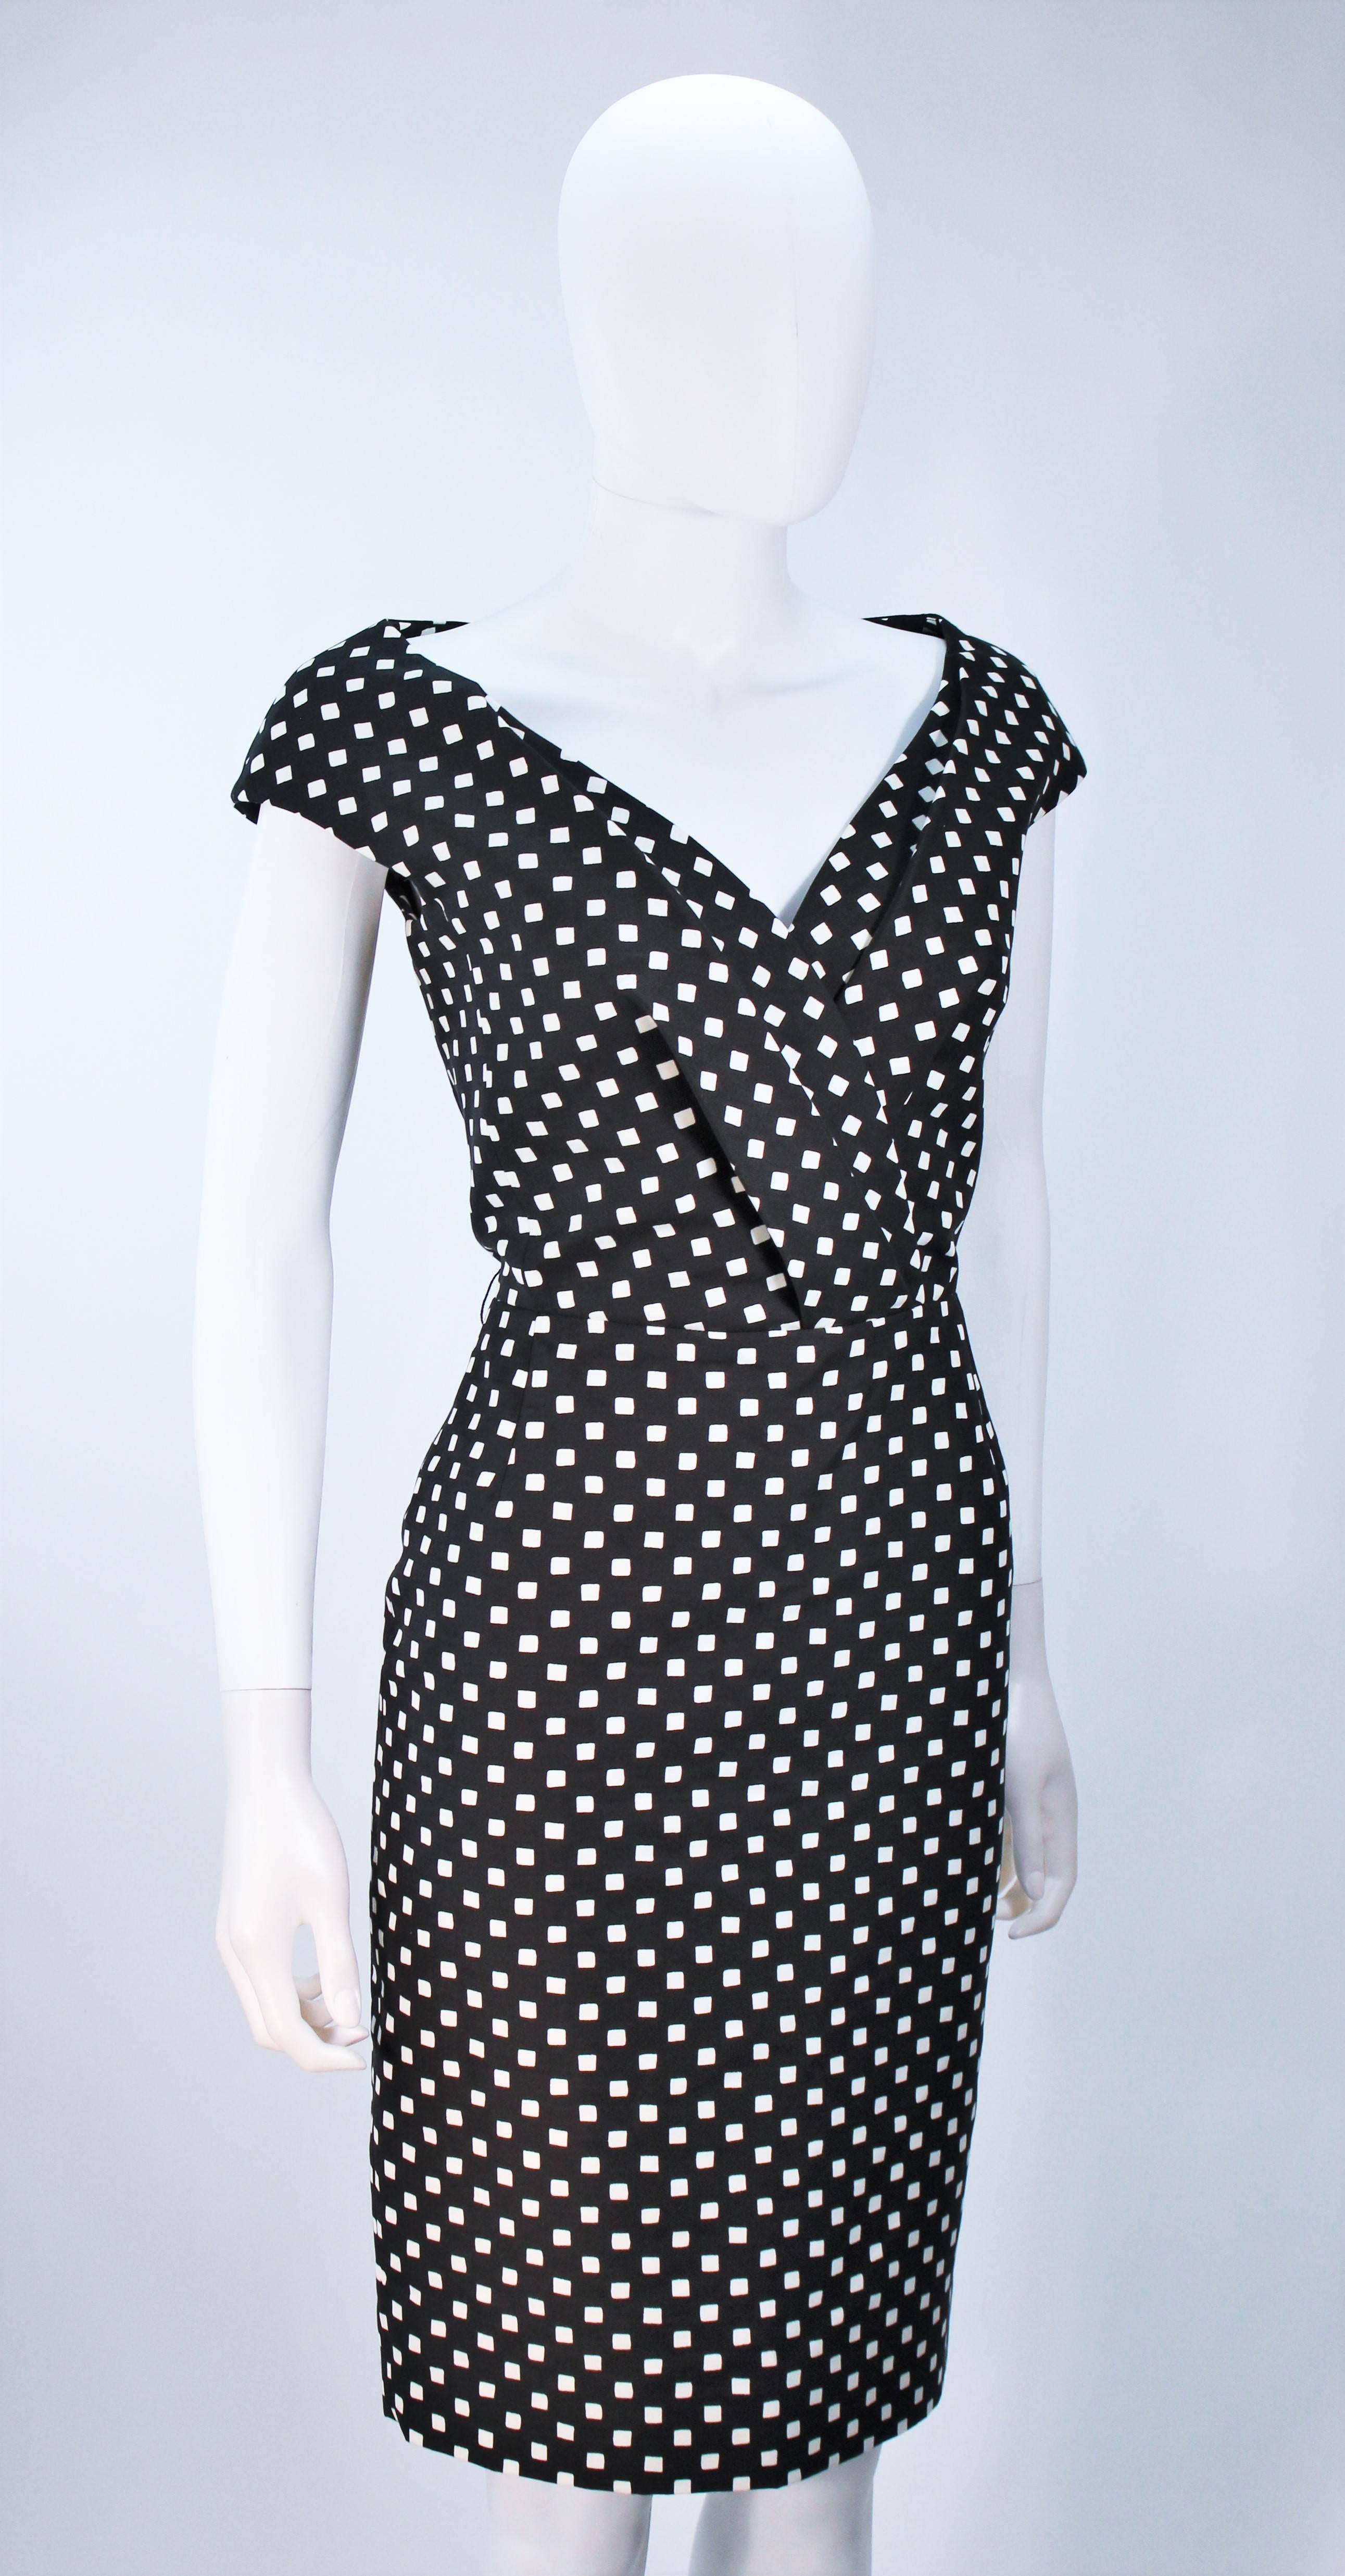 CHRISTIAN DIOR Black and White Checkered Cocktail Dress Size 42 6 2